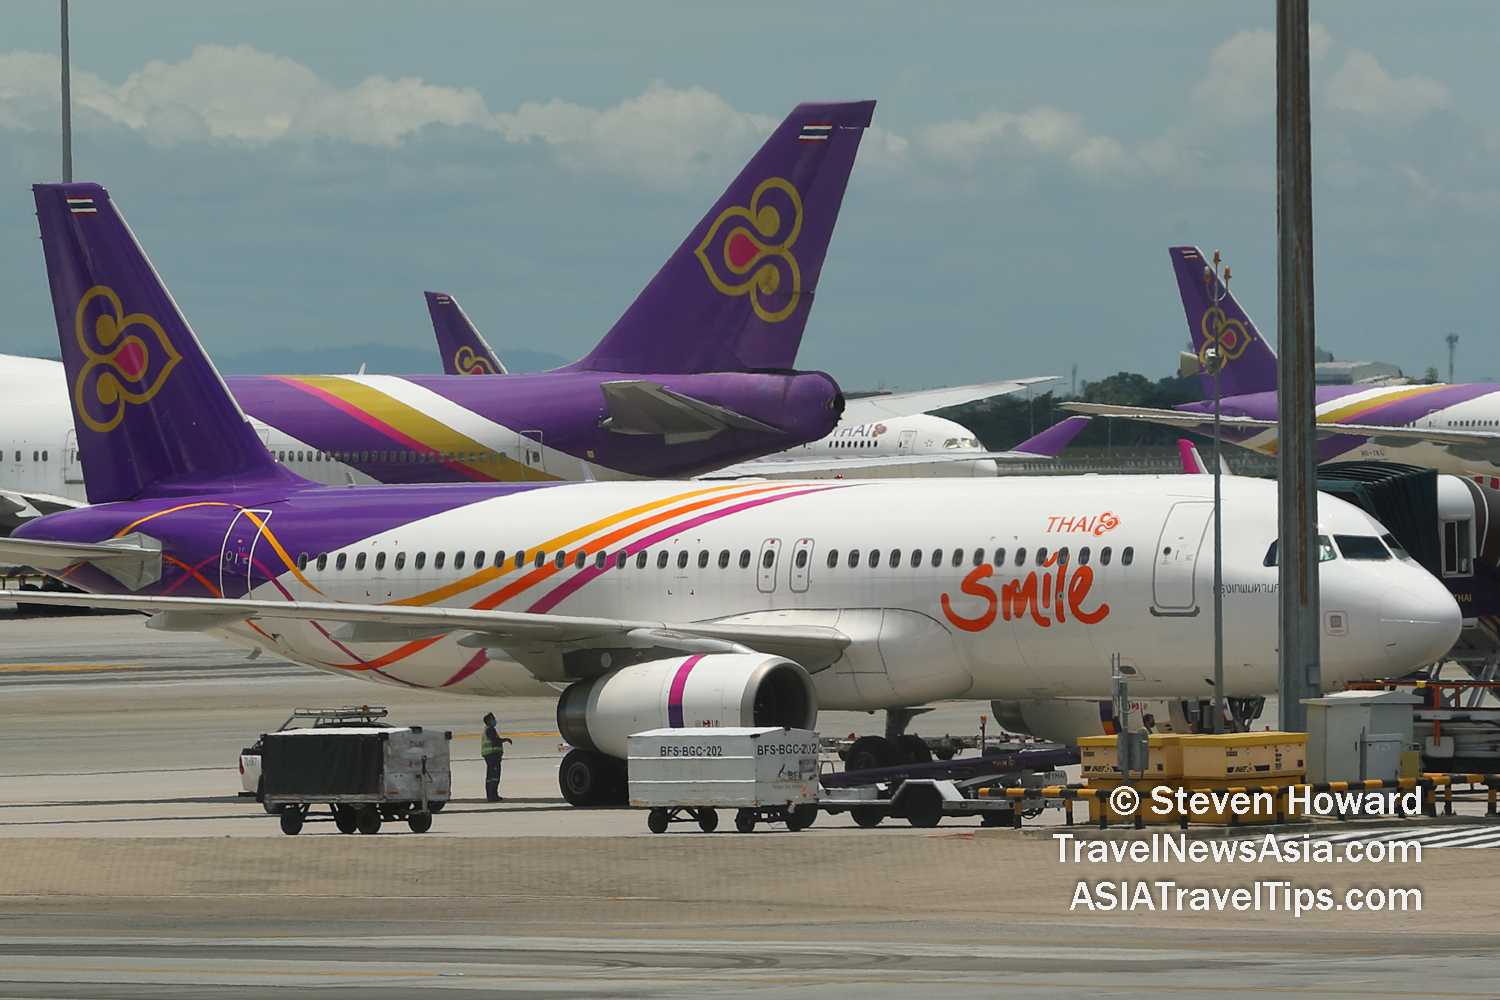 Thai Smile Airbus A320 and numerous Thai Airways aircraft at Suvarnabhumi Airport near Bangkok, Thailand. Picture by Steven Howard of TravelNewsAsia.com Click to enlarge.